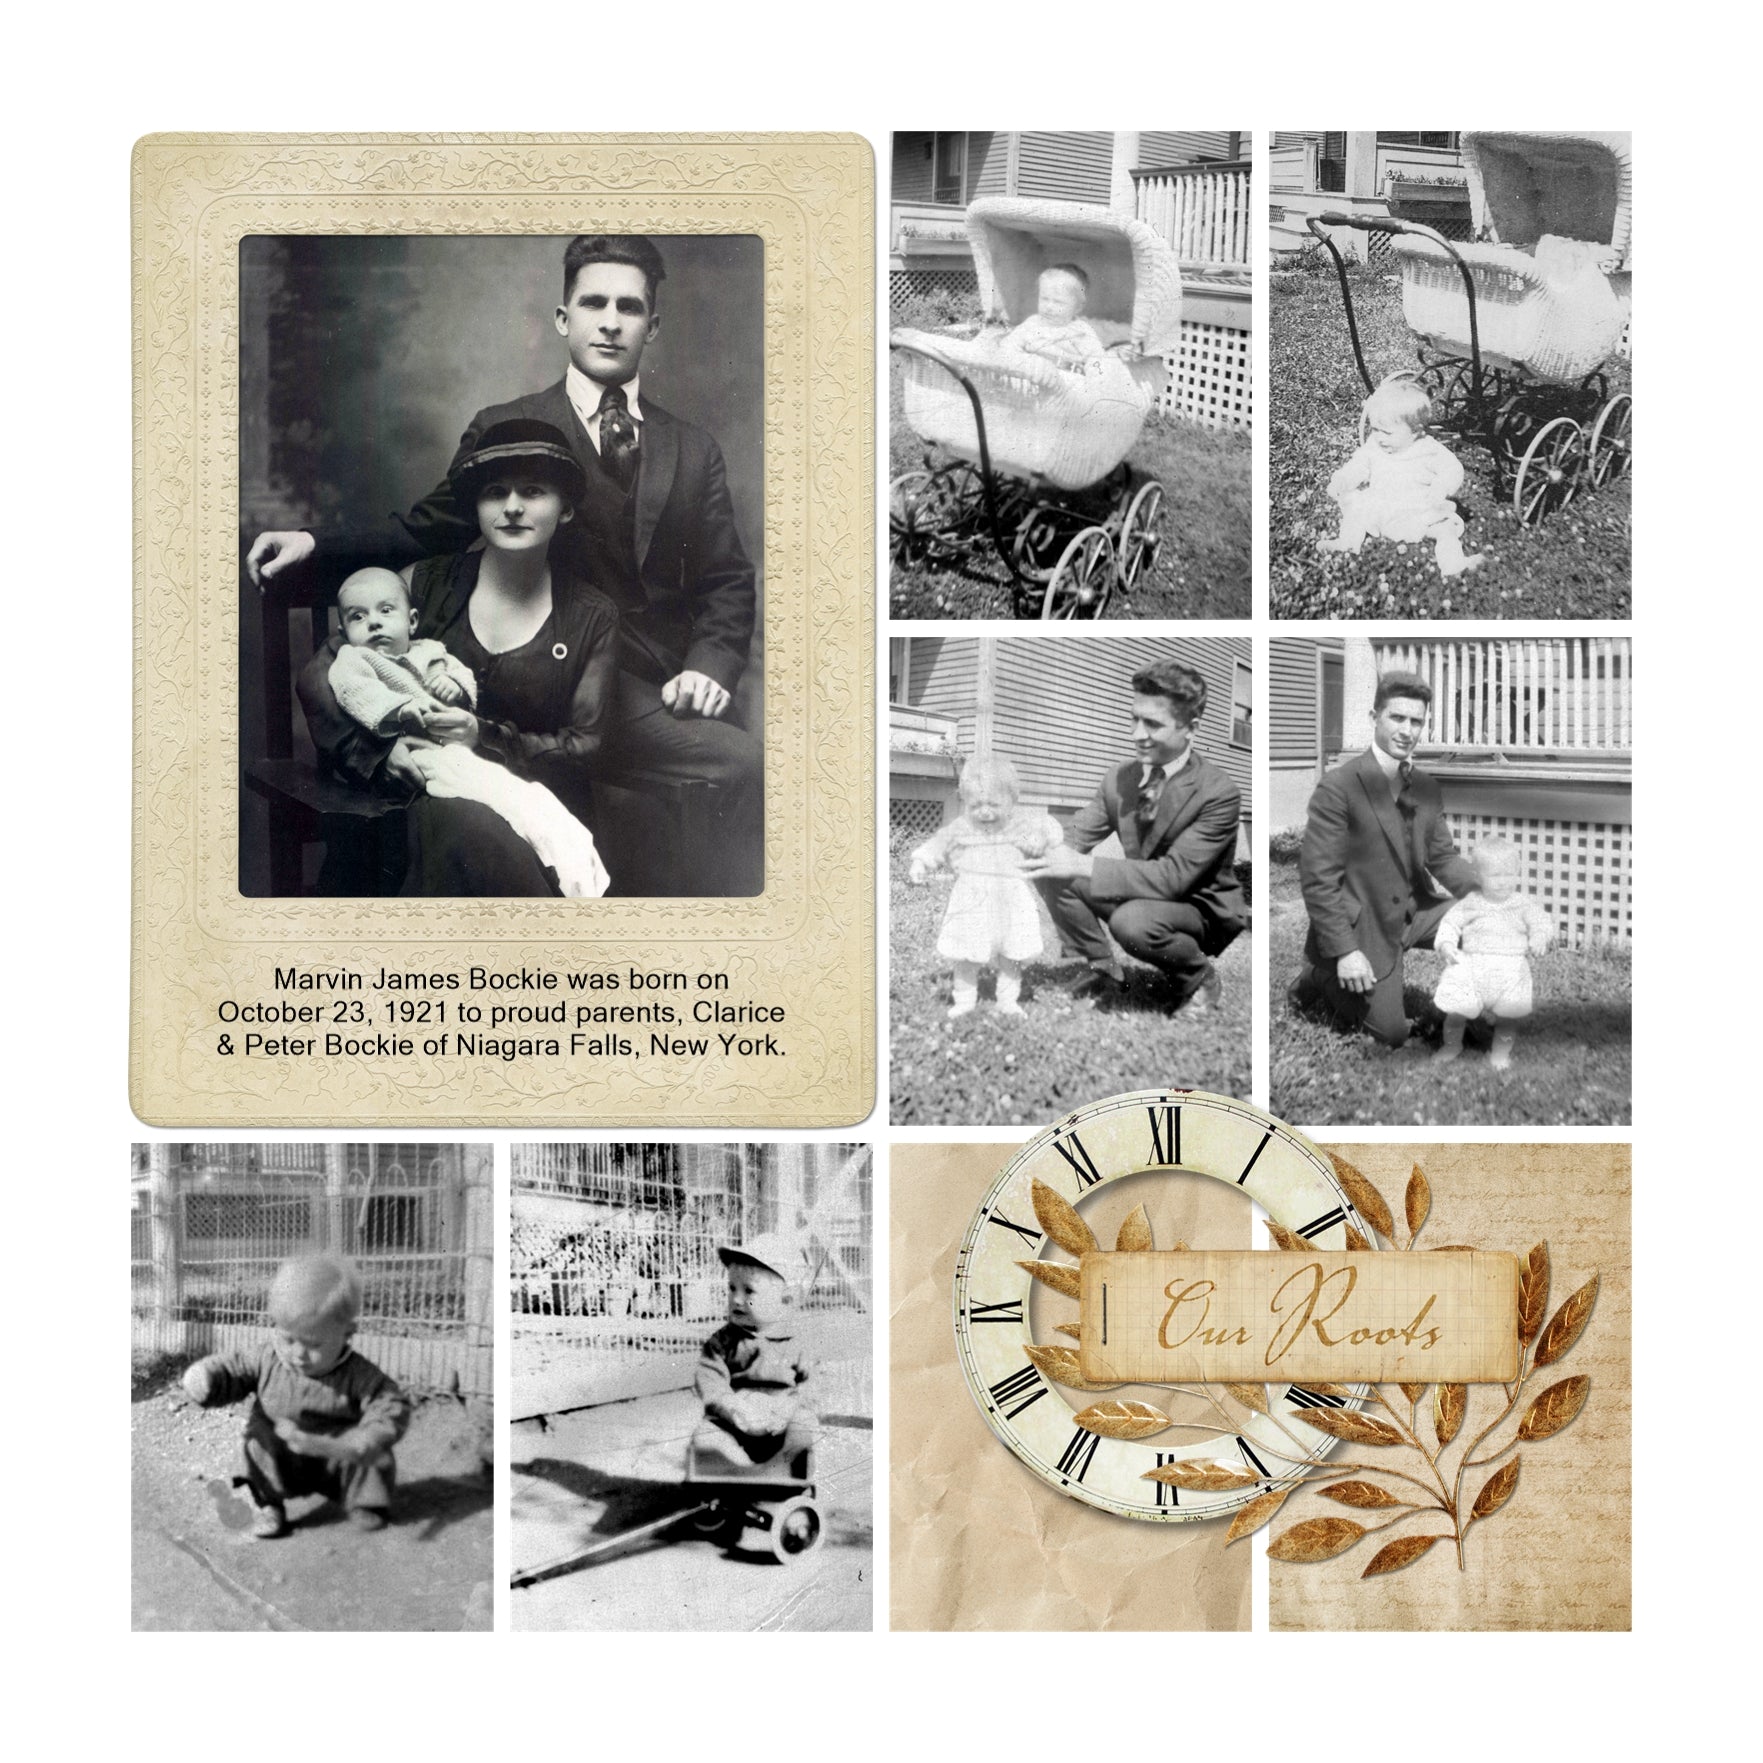 The Vintage Memories Digital Scrapbook Bundle 2 includes pre-designed digital art tags and customized family tree builder pieces which are the perfect way to accent your vintage family history and genealogy projects.